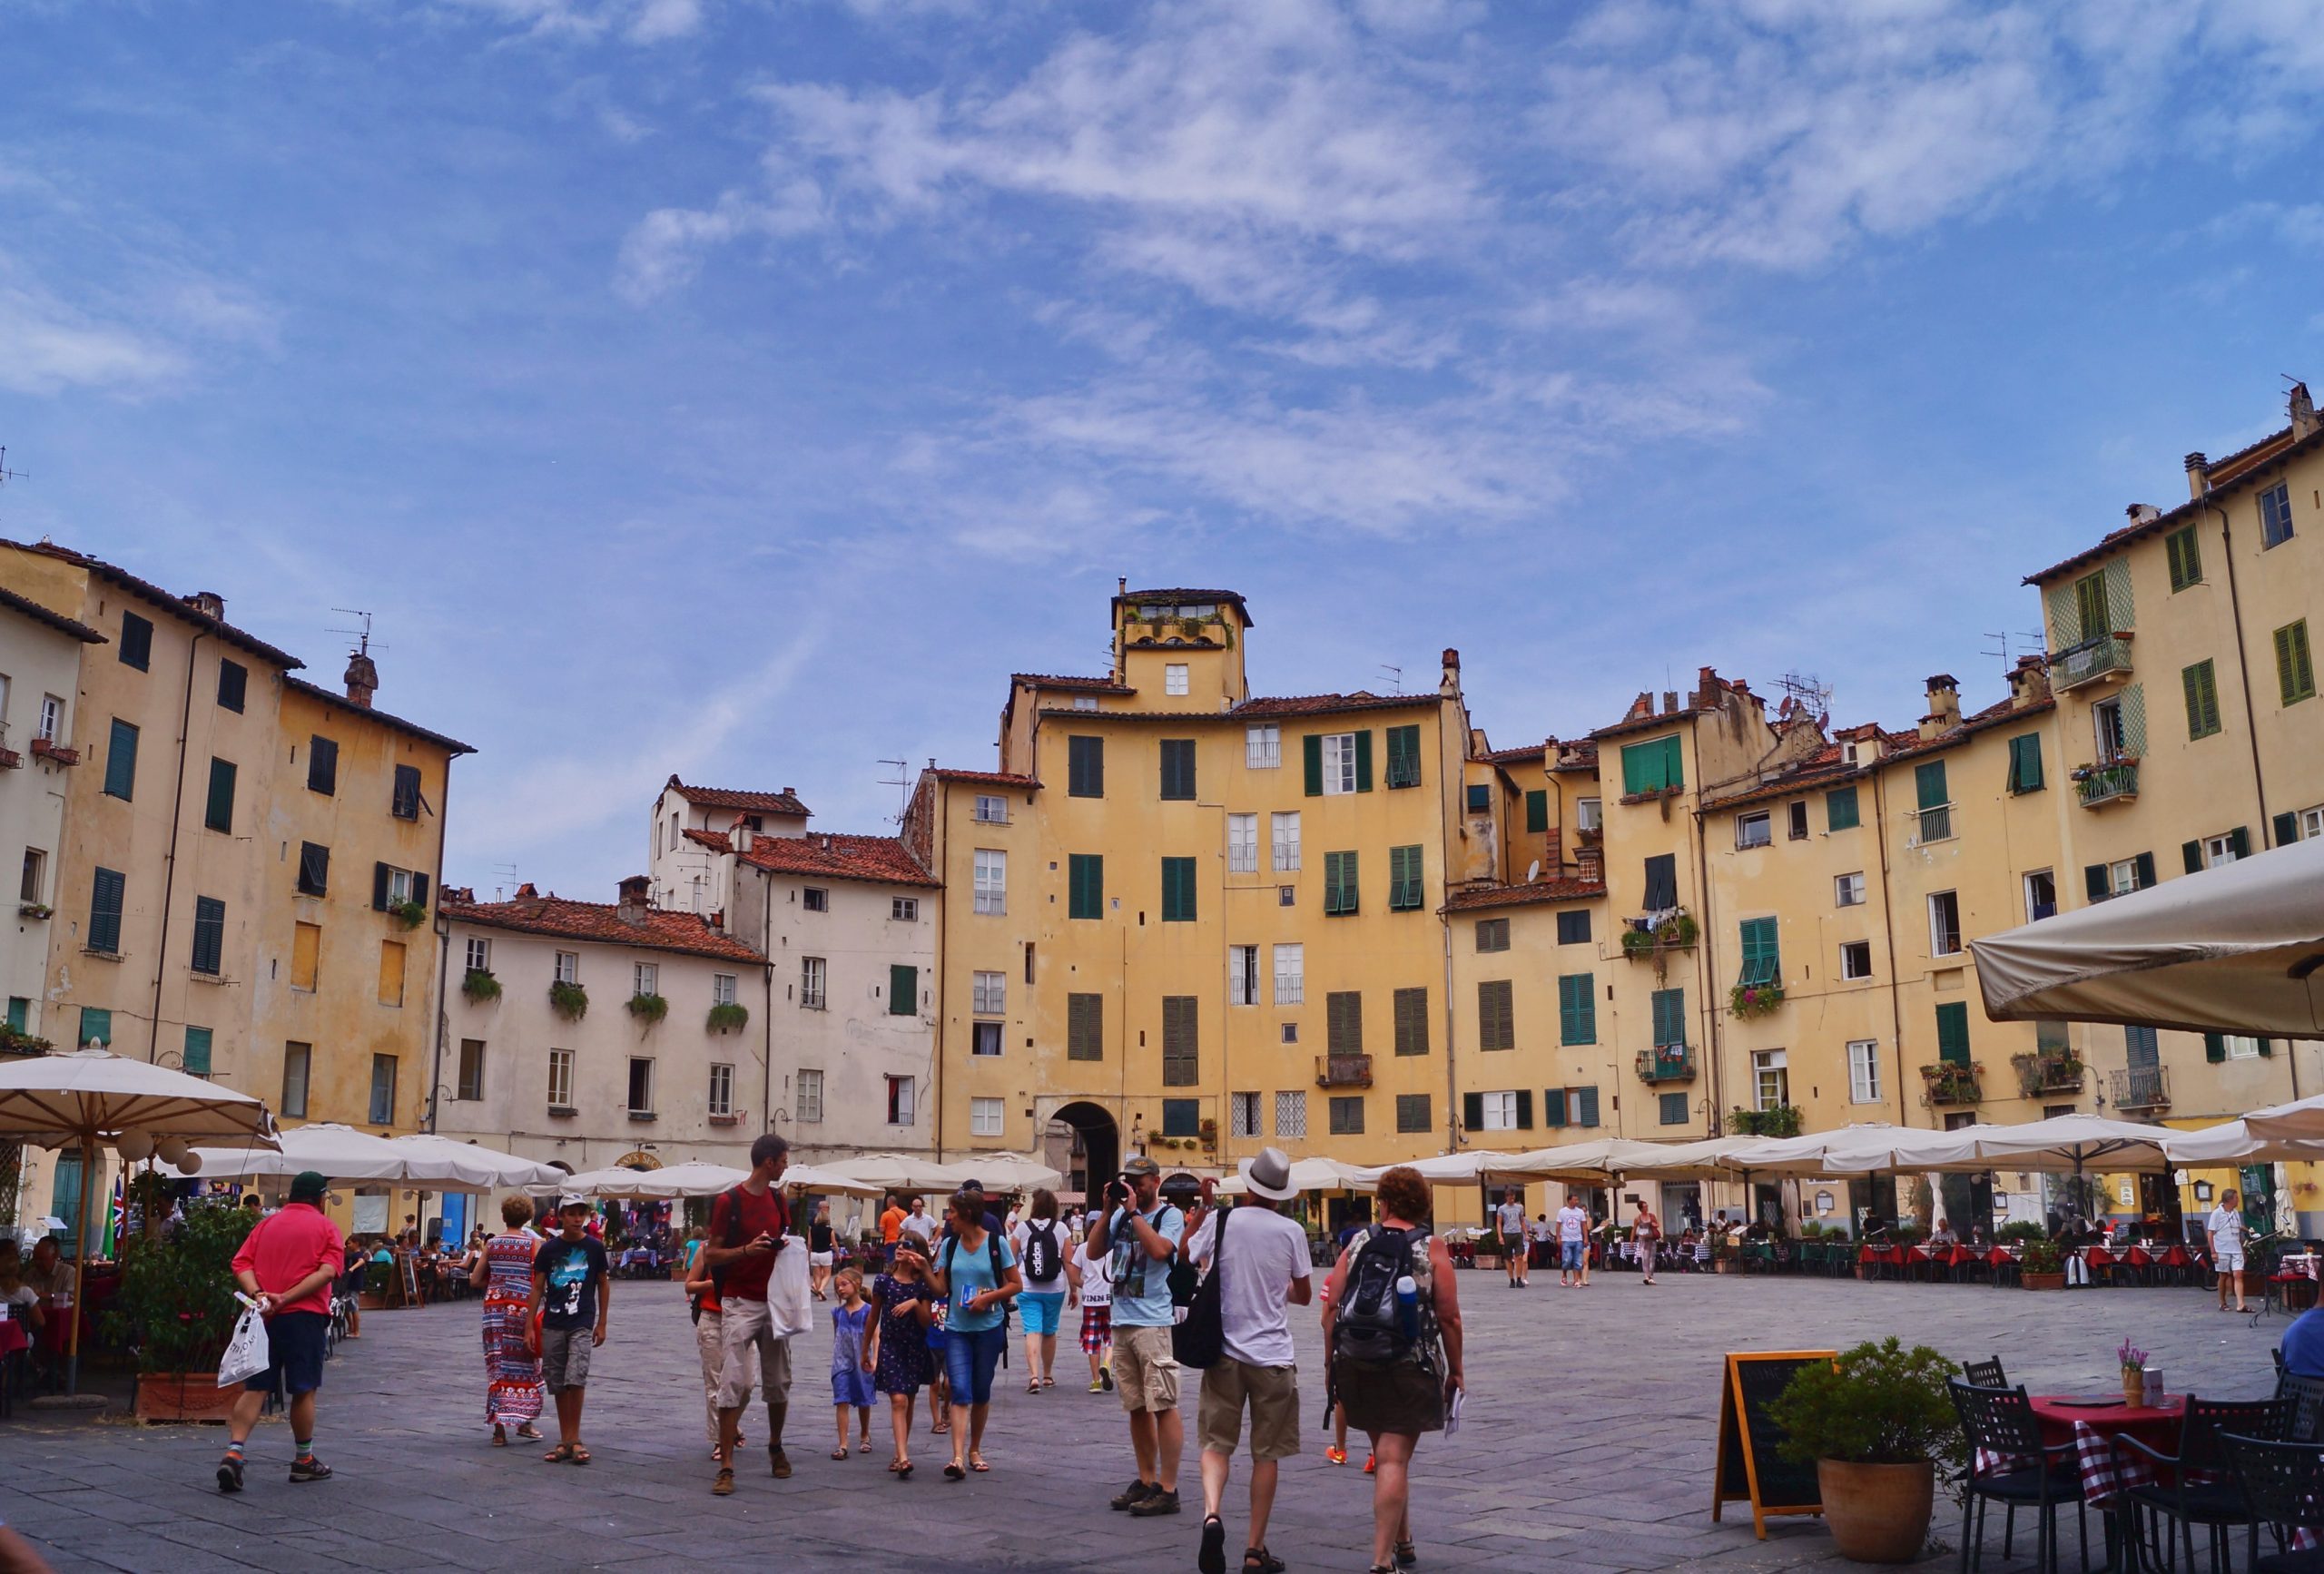 Piazza Lucca